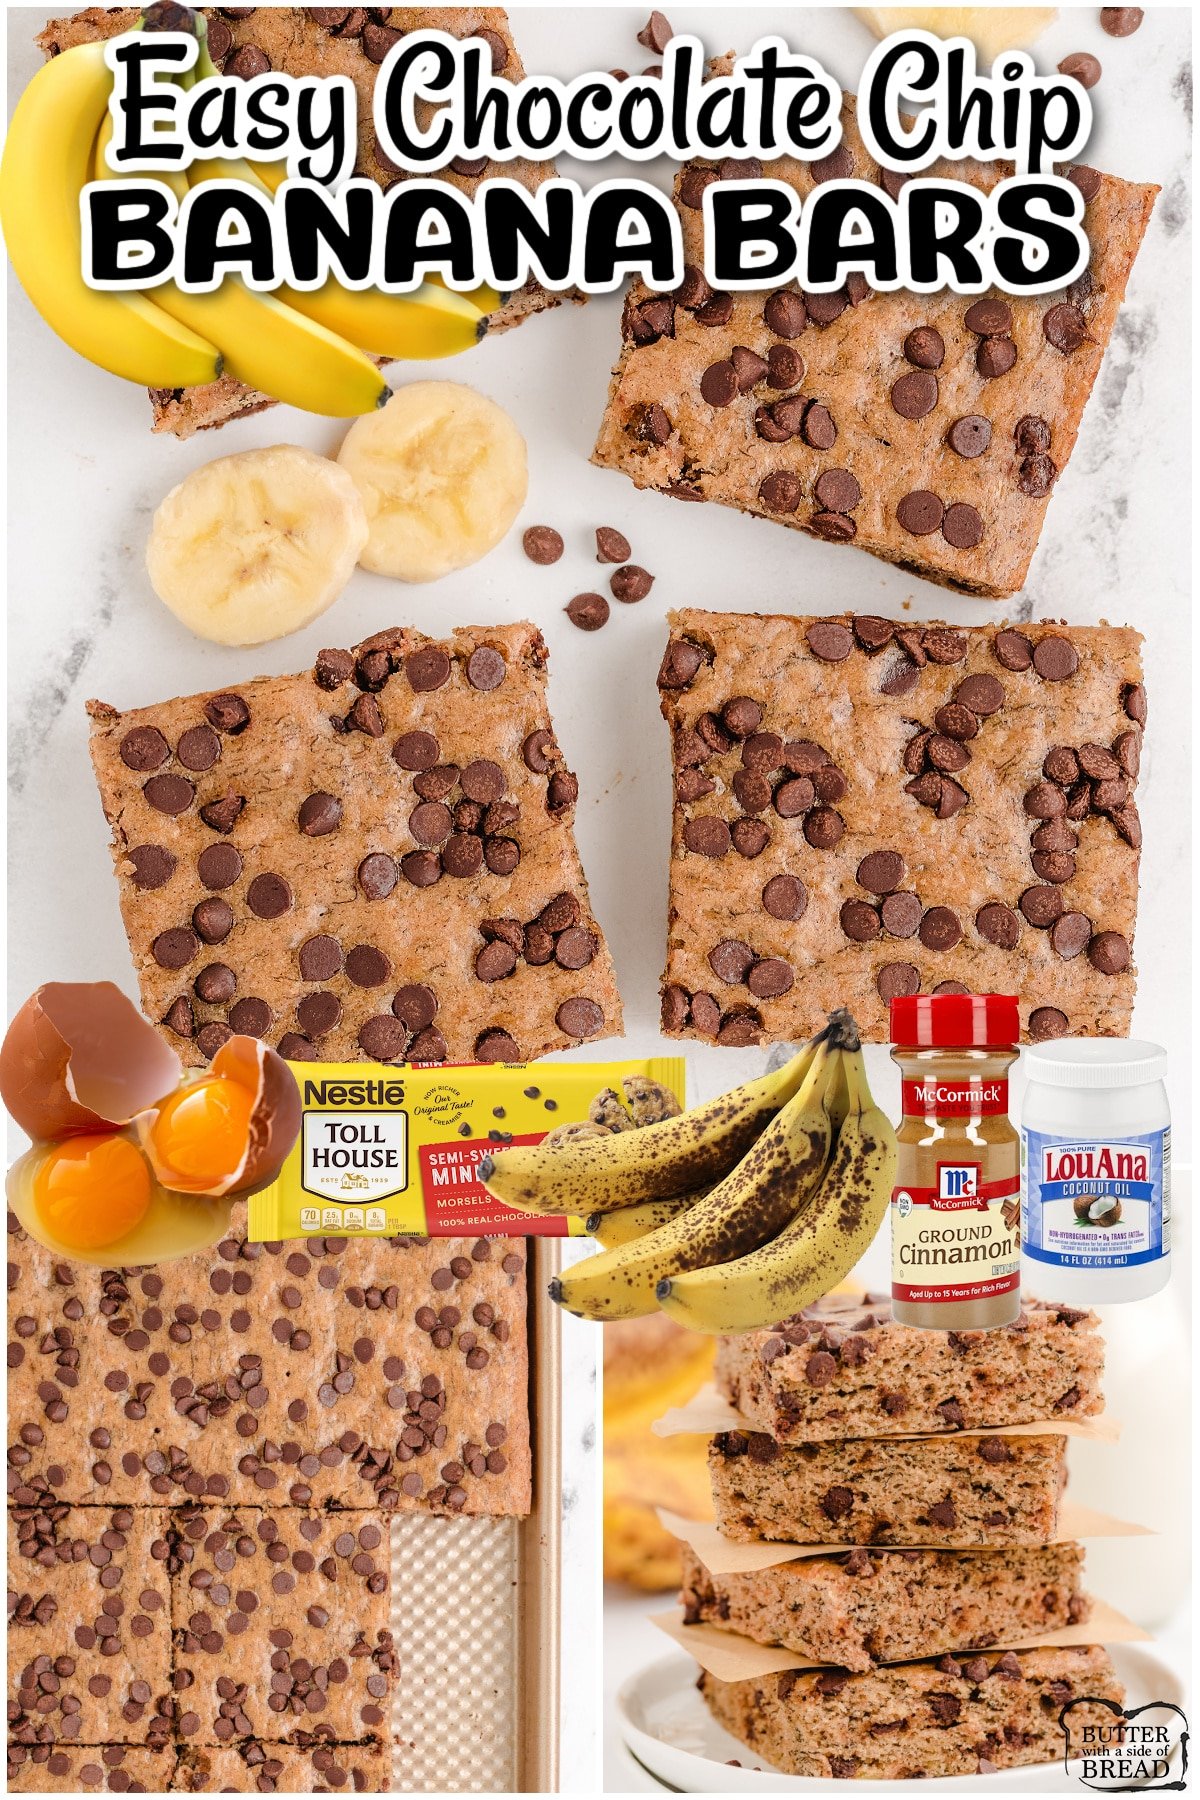 Chocolate Chip Banana Bars are a simple & delicious ripe banana recipe that's even better than banana bread! Great for breakfast, lunch and even dessert! Check out all the 5 star reviews- everyone raves about this easy banana recipe!